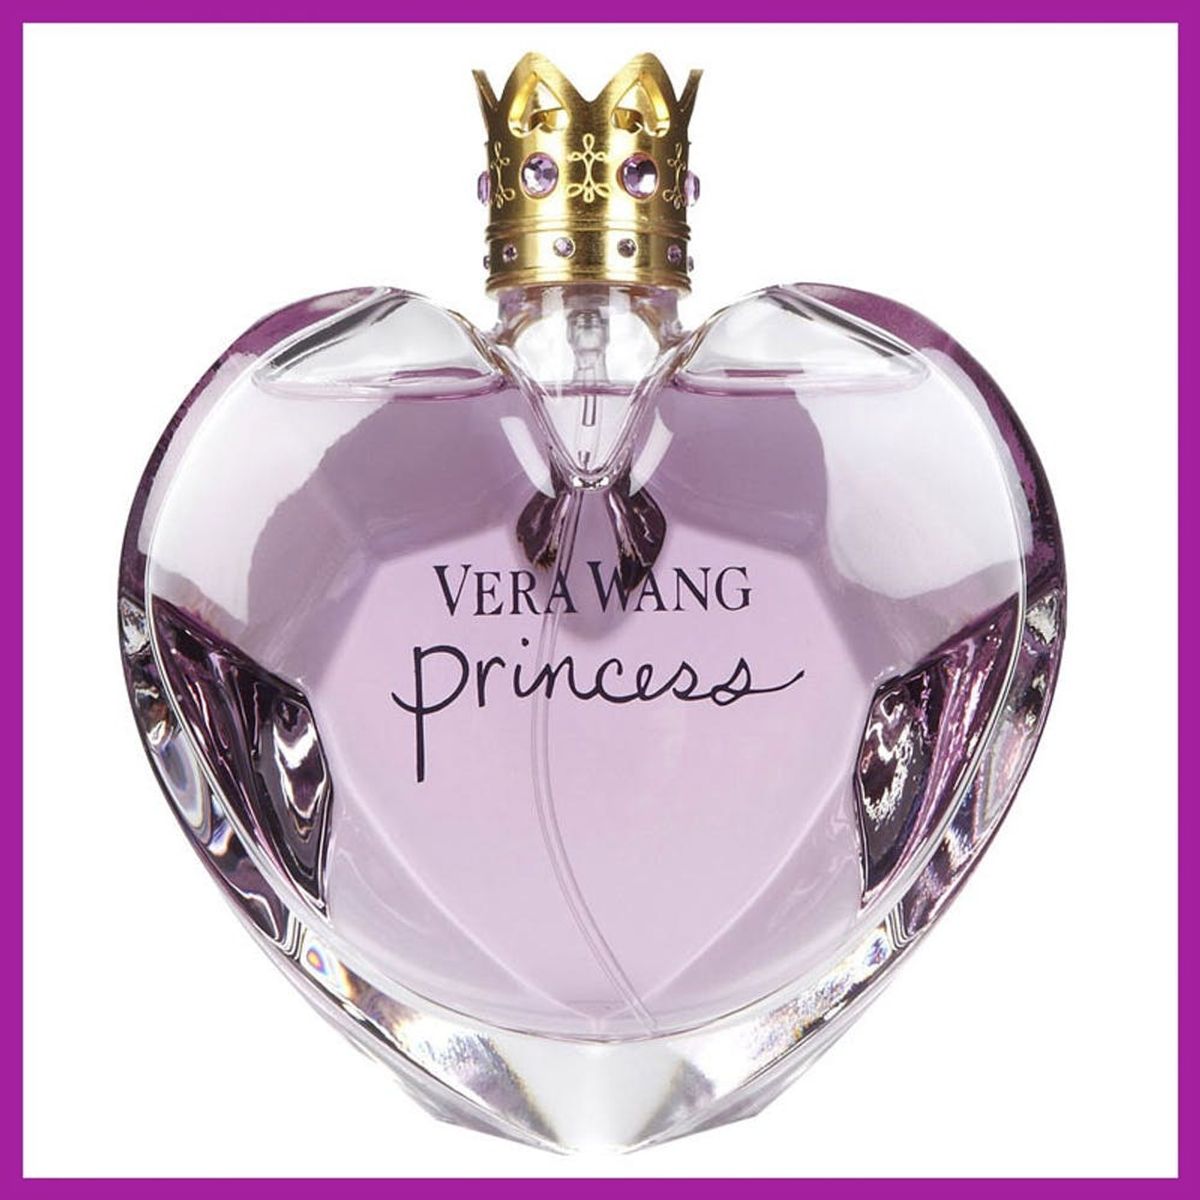 What Your Favorite Perfume as a Teen Says About You